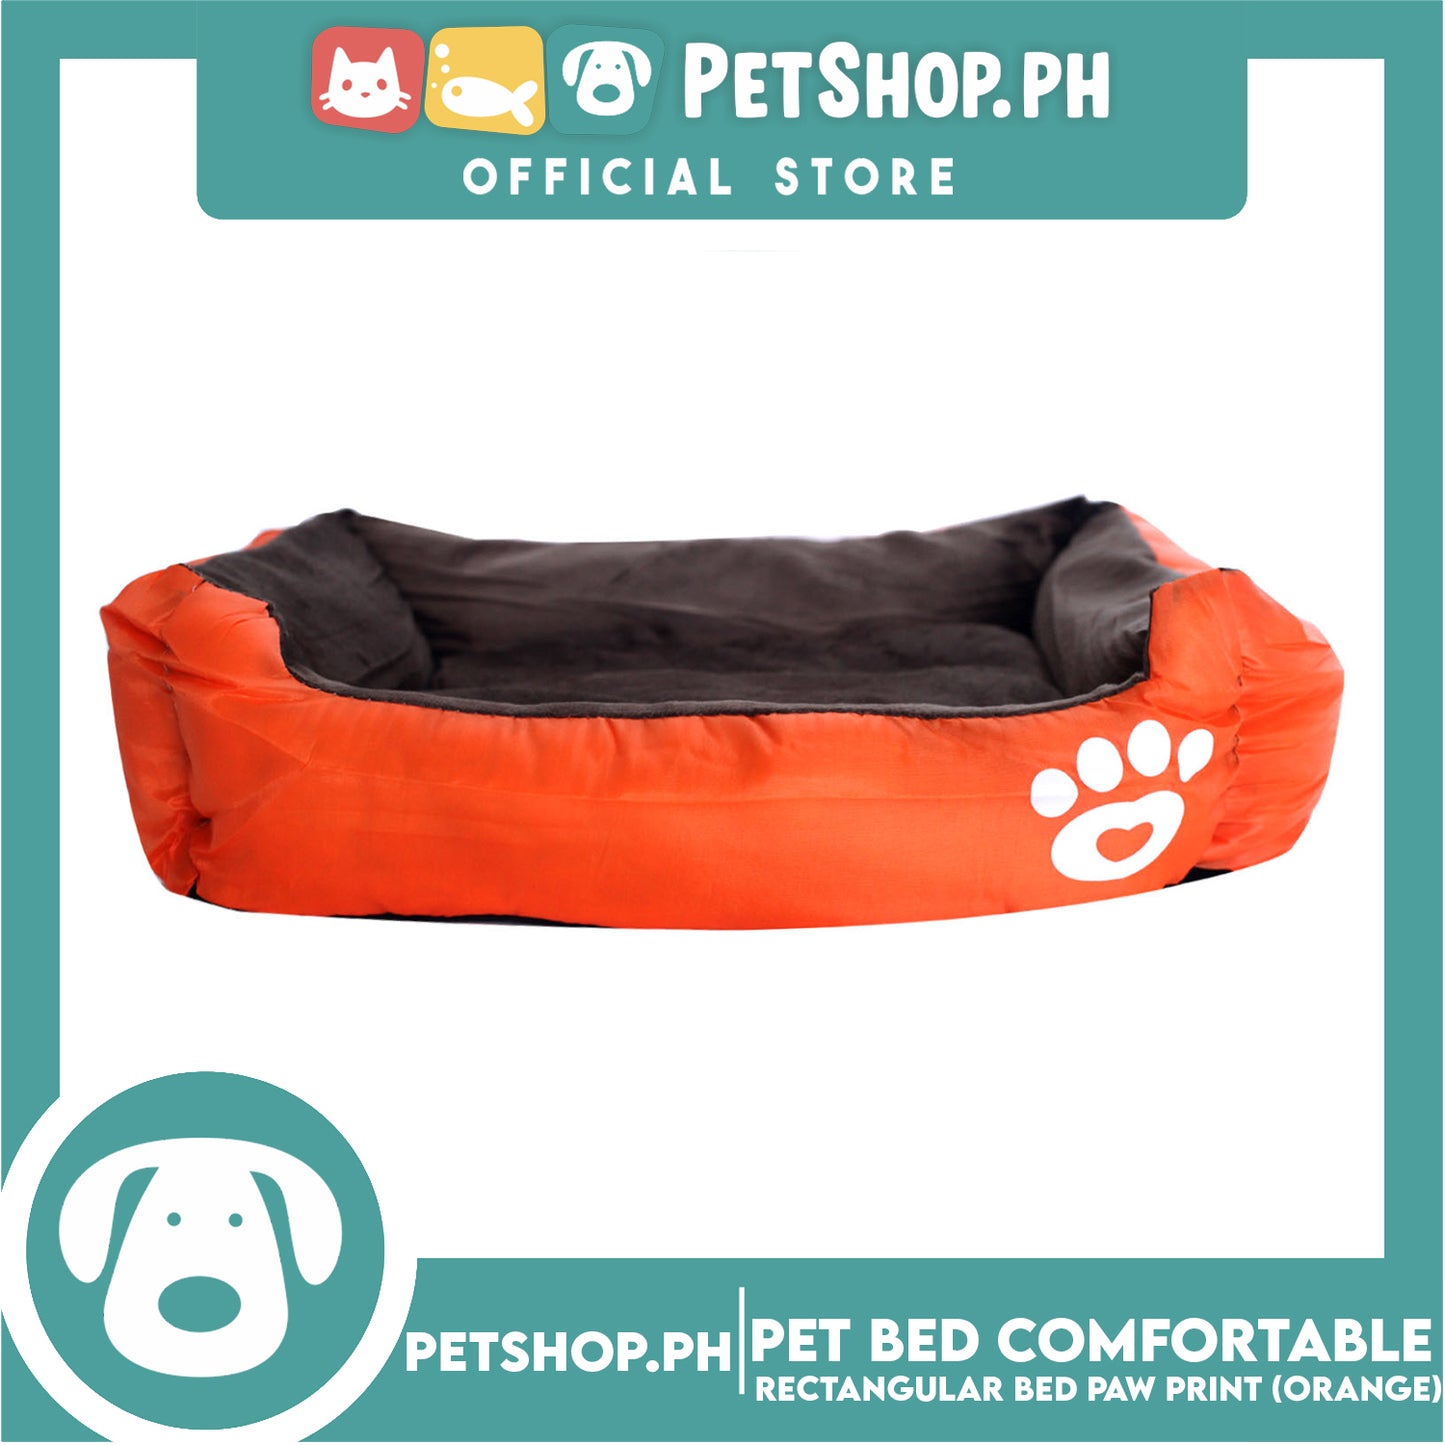 Pet Bed Comfortable Rectangular Pet Bed with Paw Print 62x50x12cm Medium for Dogs & Cats (Orange)